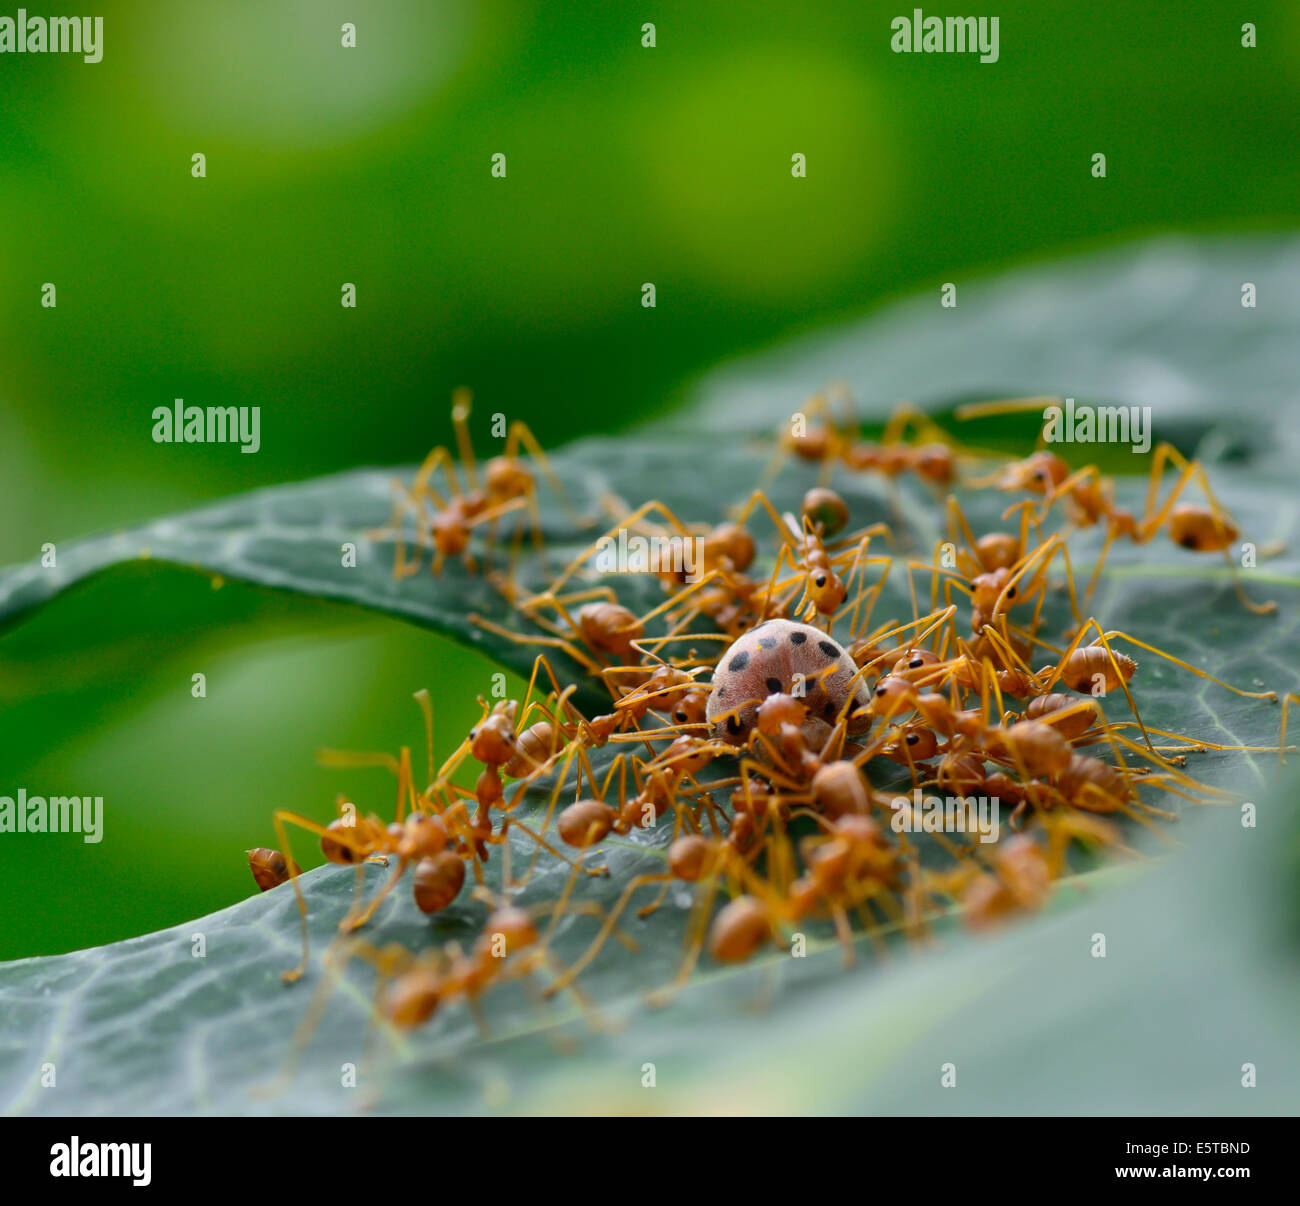 macro of red ant army  are swarming ladybug for food ; selective focus at ladybug with green blur background Stock Photo